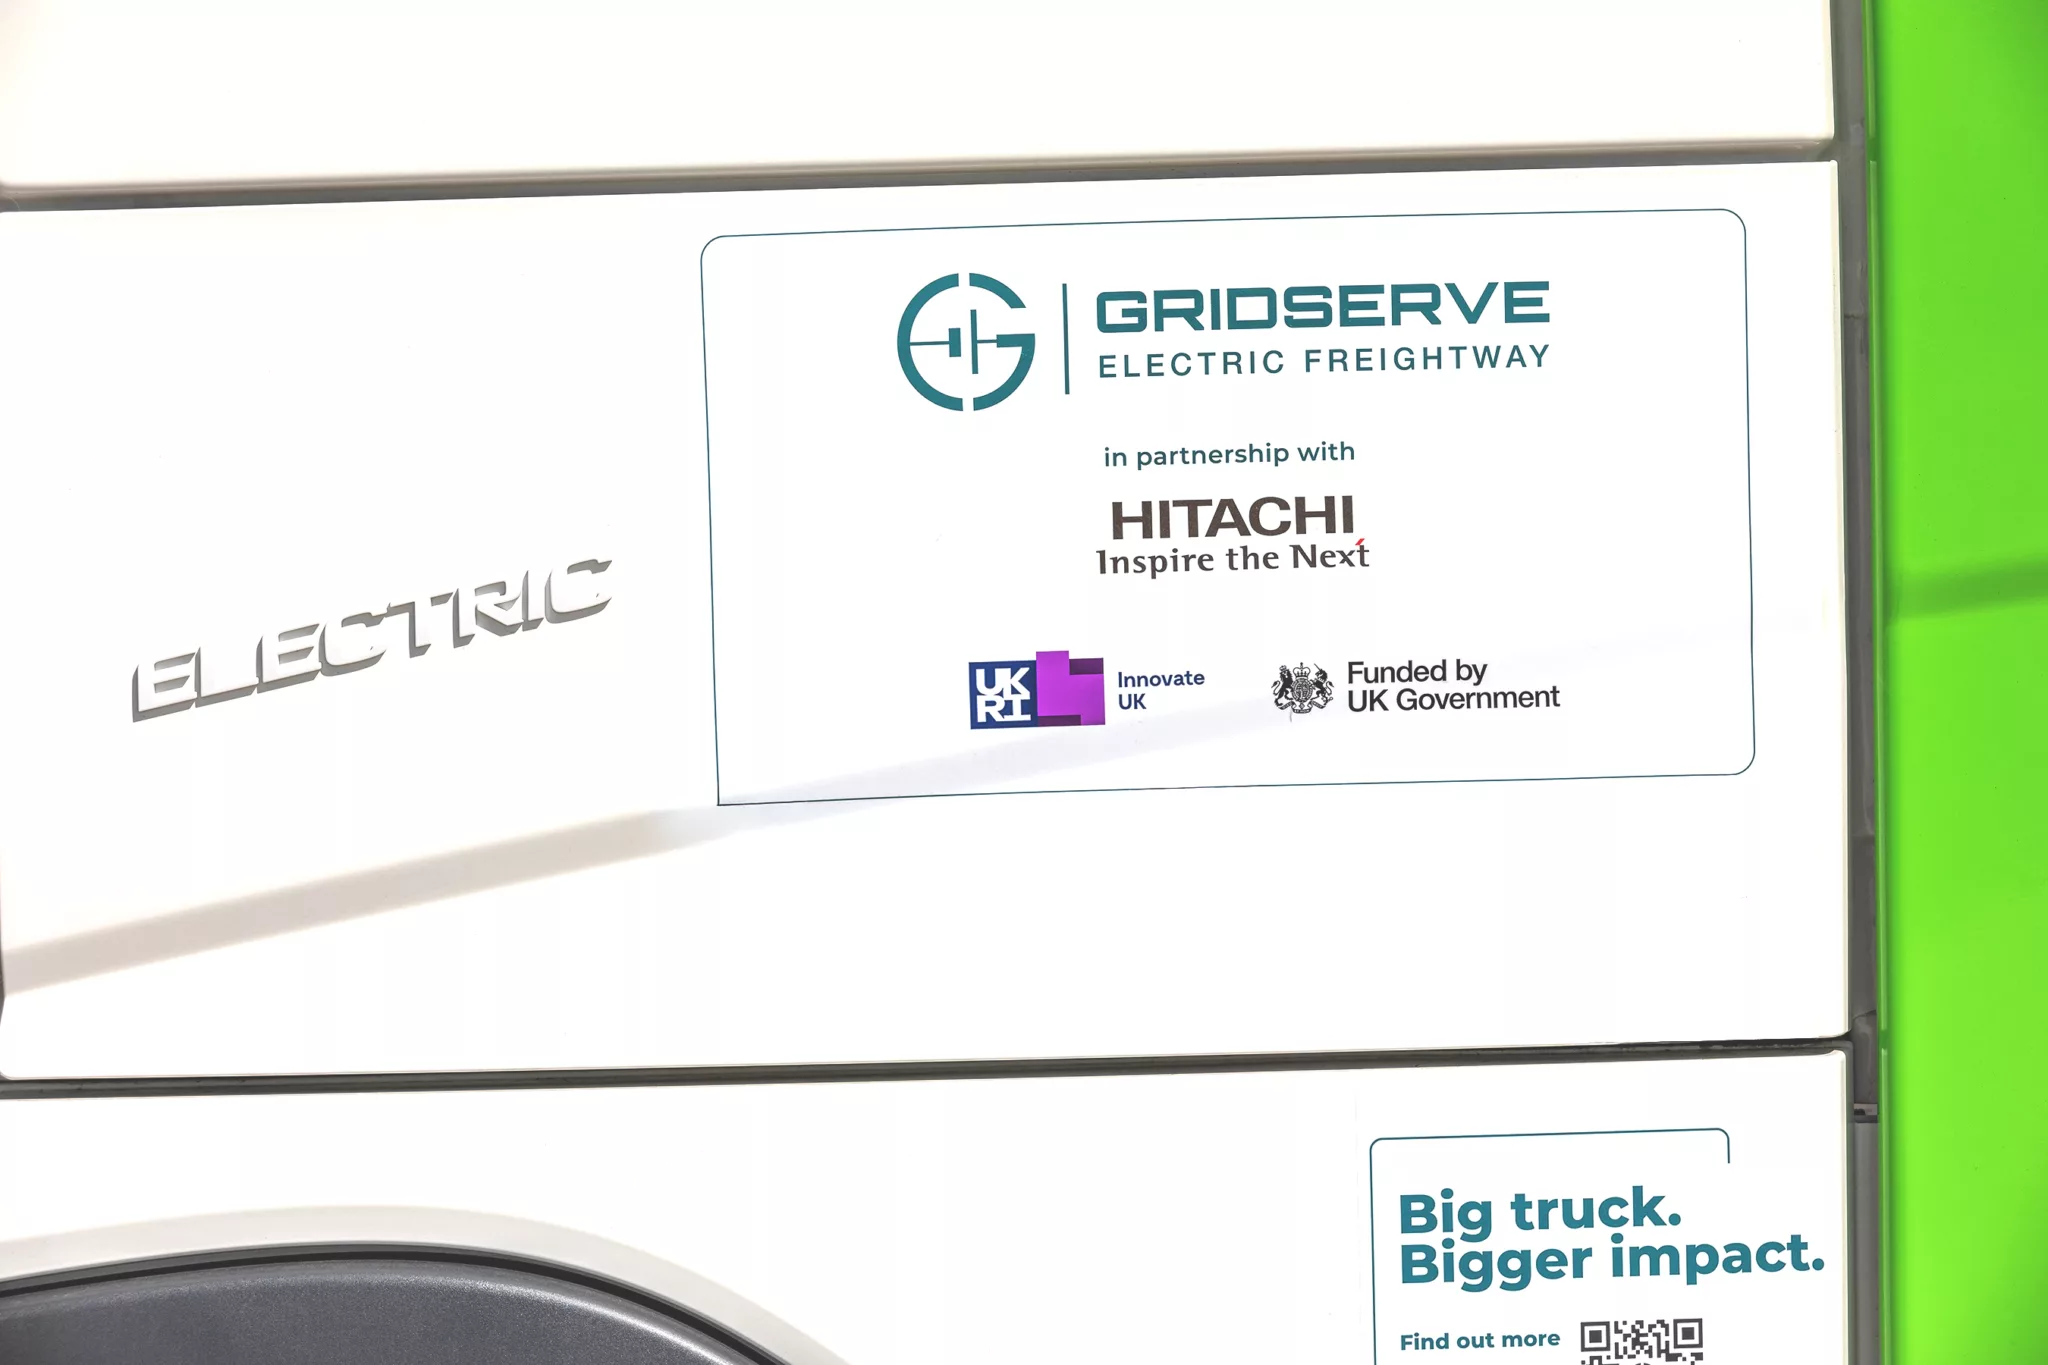 GRIDSERVE Electric Freightway logo